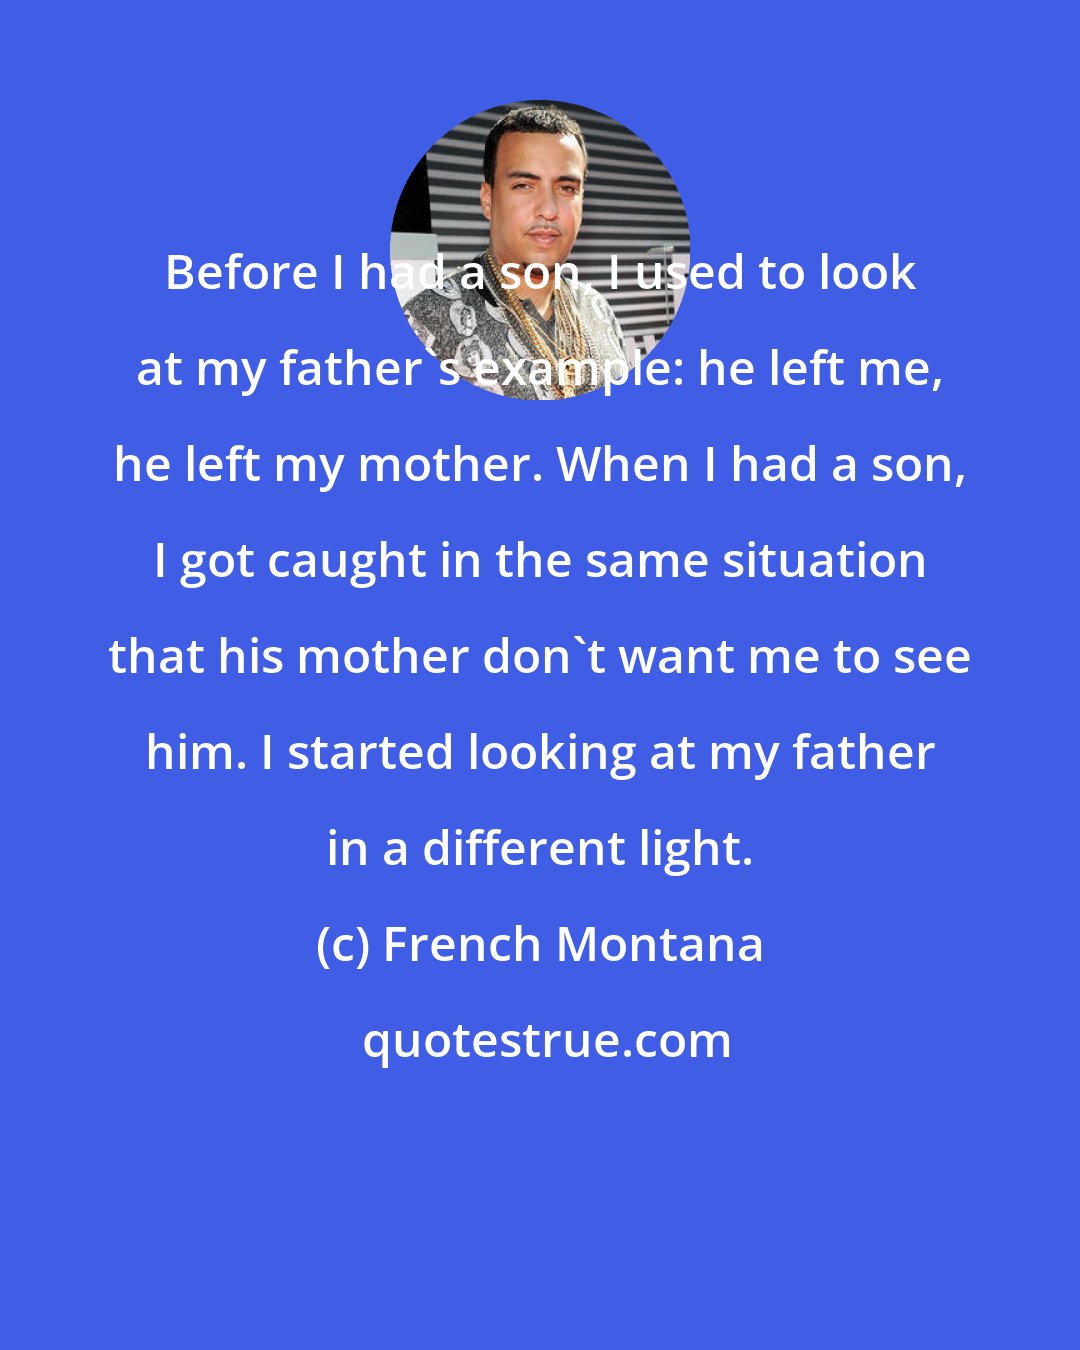 French Montana: Before I had a son, I used to look at my father's example: he left me, he left my mother. When I had a son, I got caught in the same situation that his mother don't want me to see him. I started looking at my father in a different light.